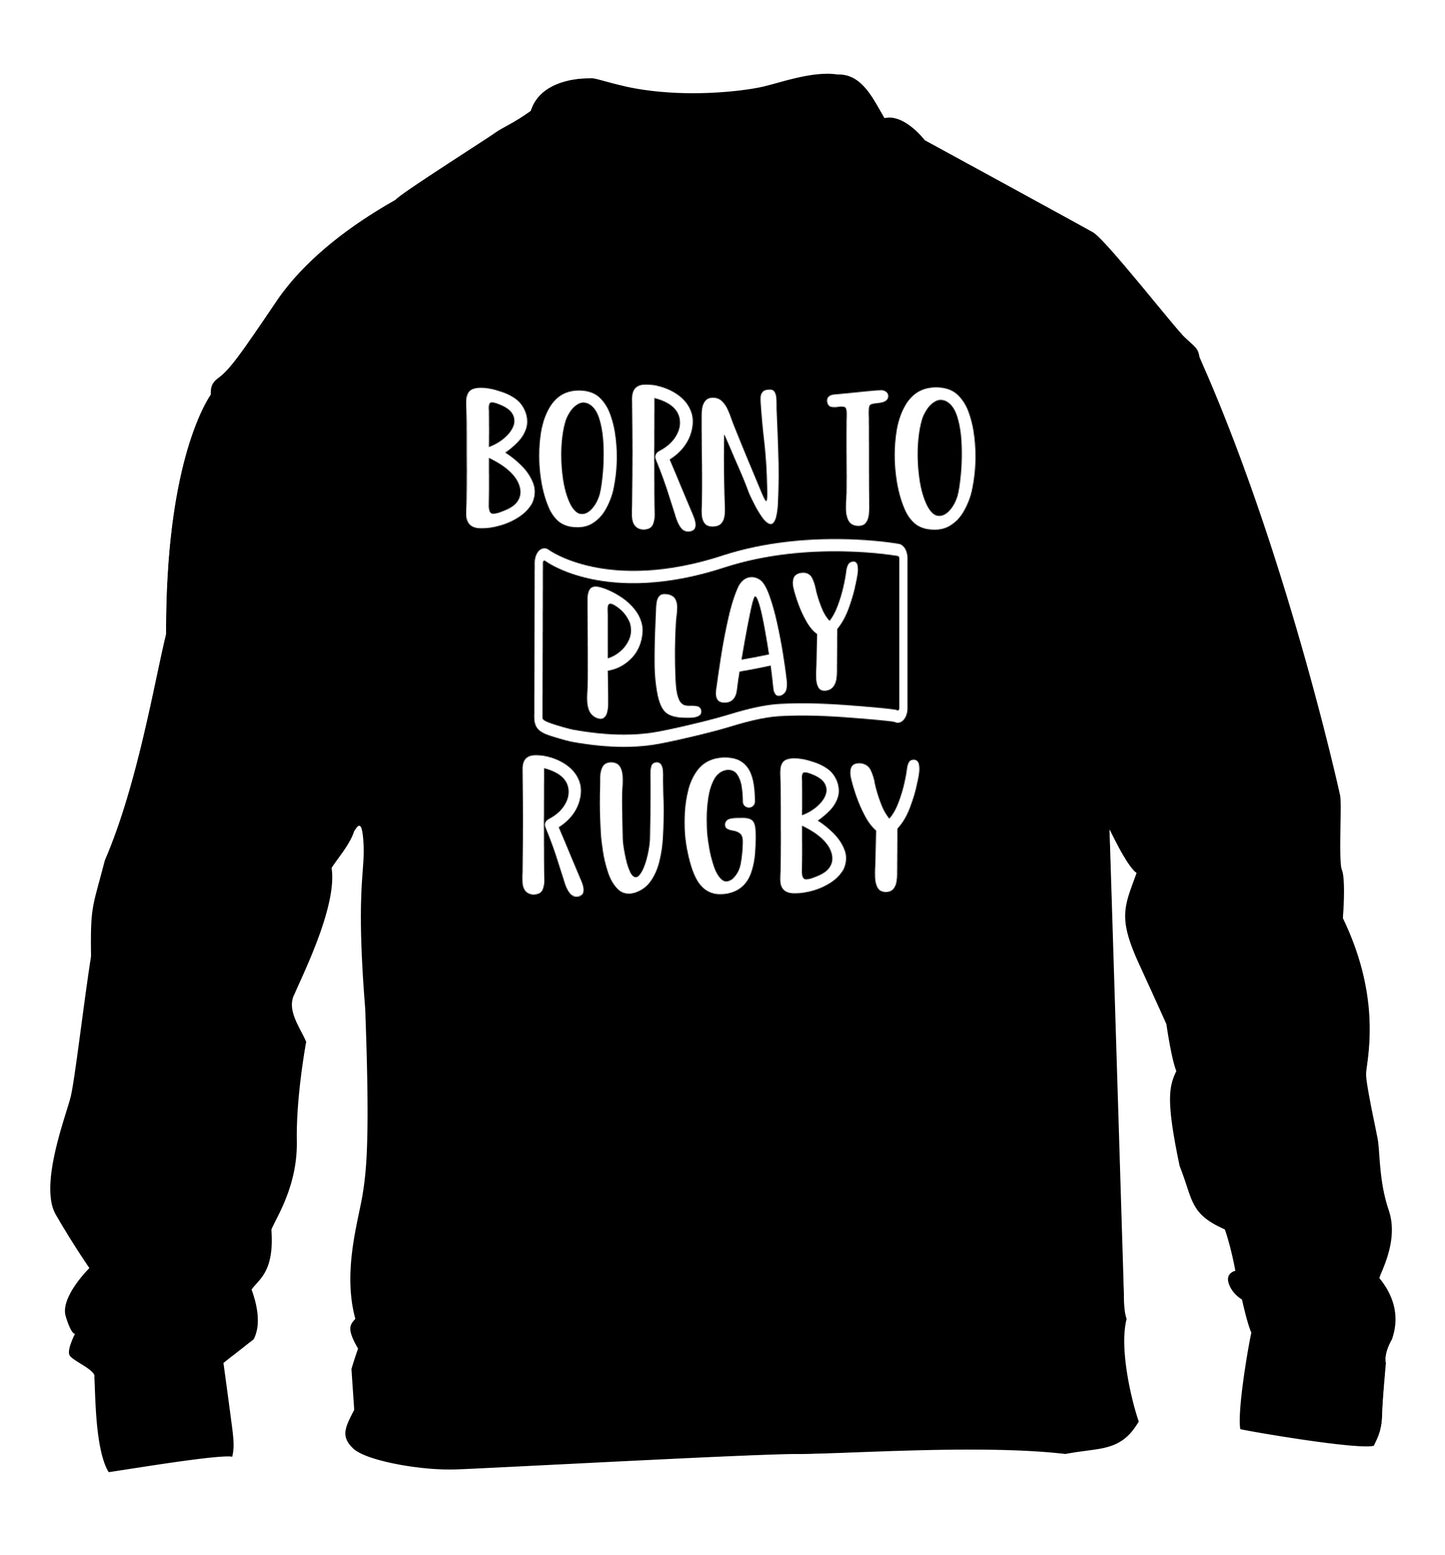 Born to play rugby children's black sweater 12-13 Years